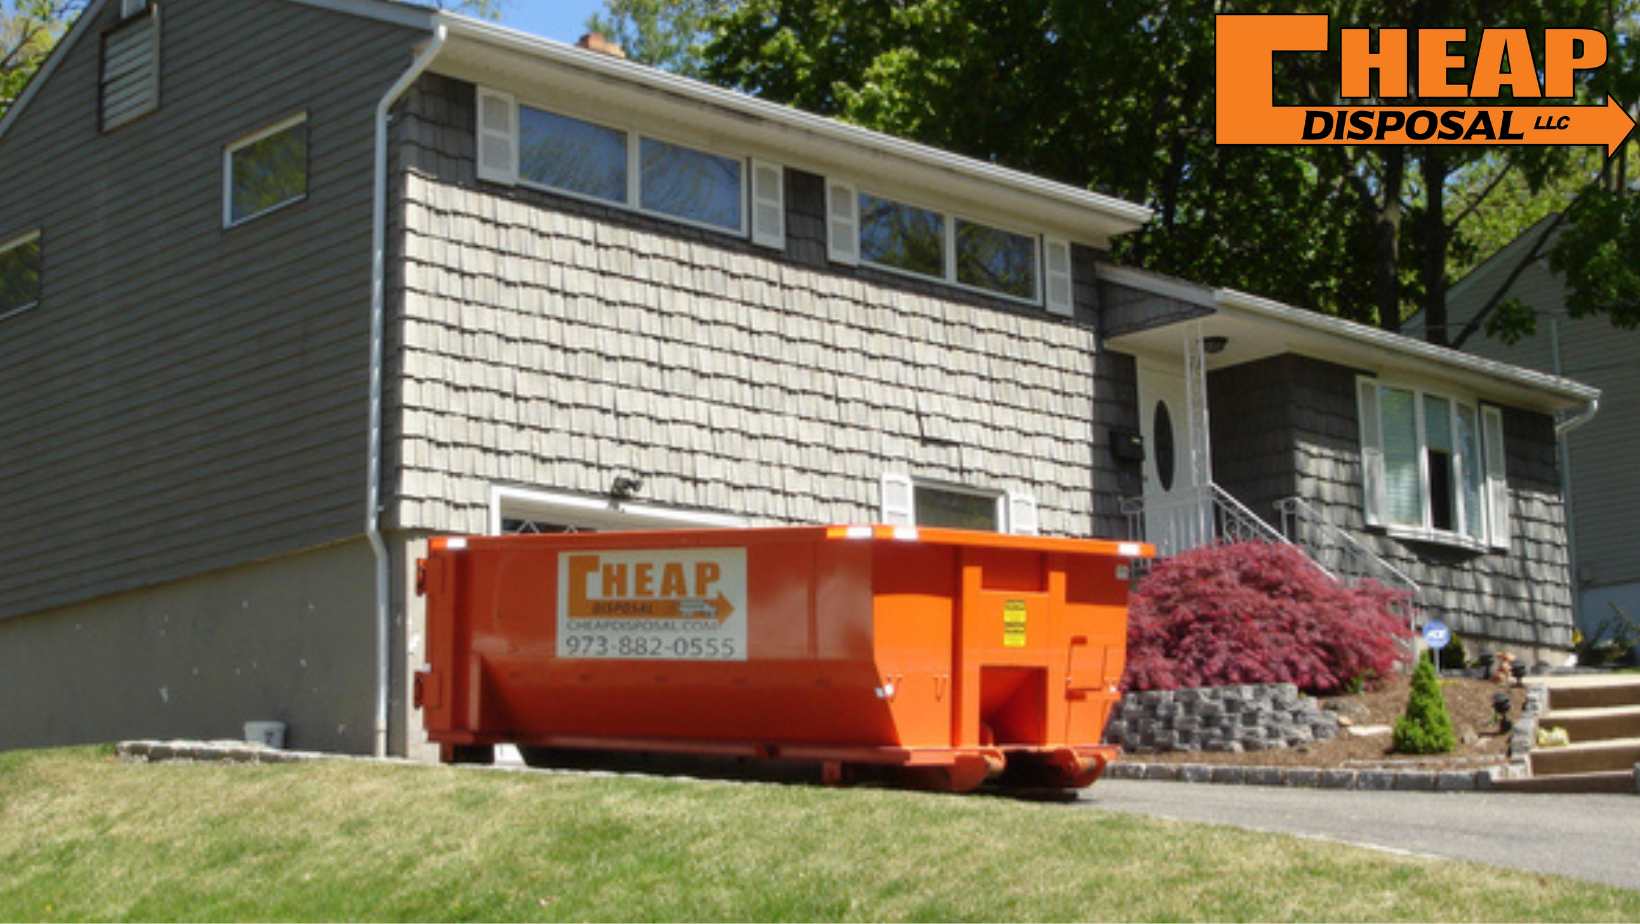 Make Any Occasion a Success with Cheap Disposal’s Dumpster and Portable Toilet Rentals 8